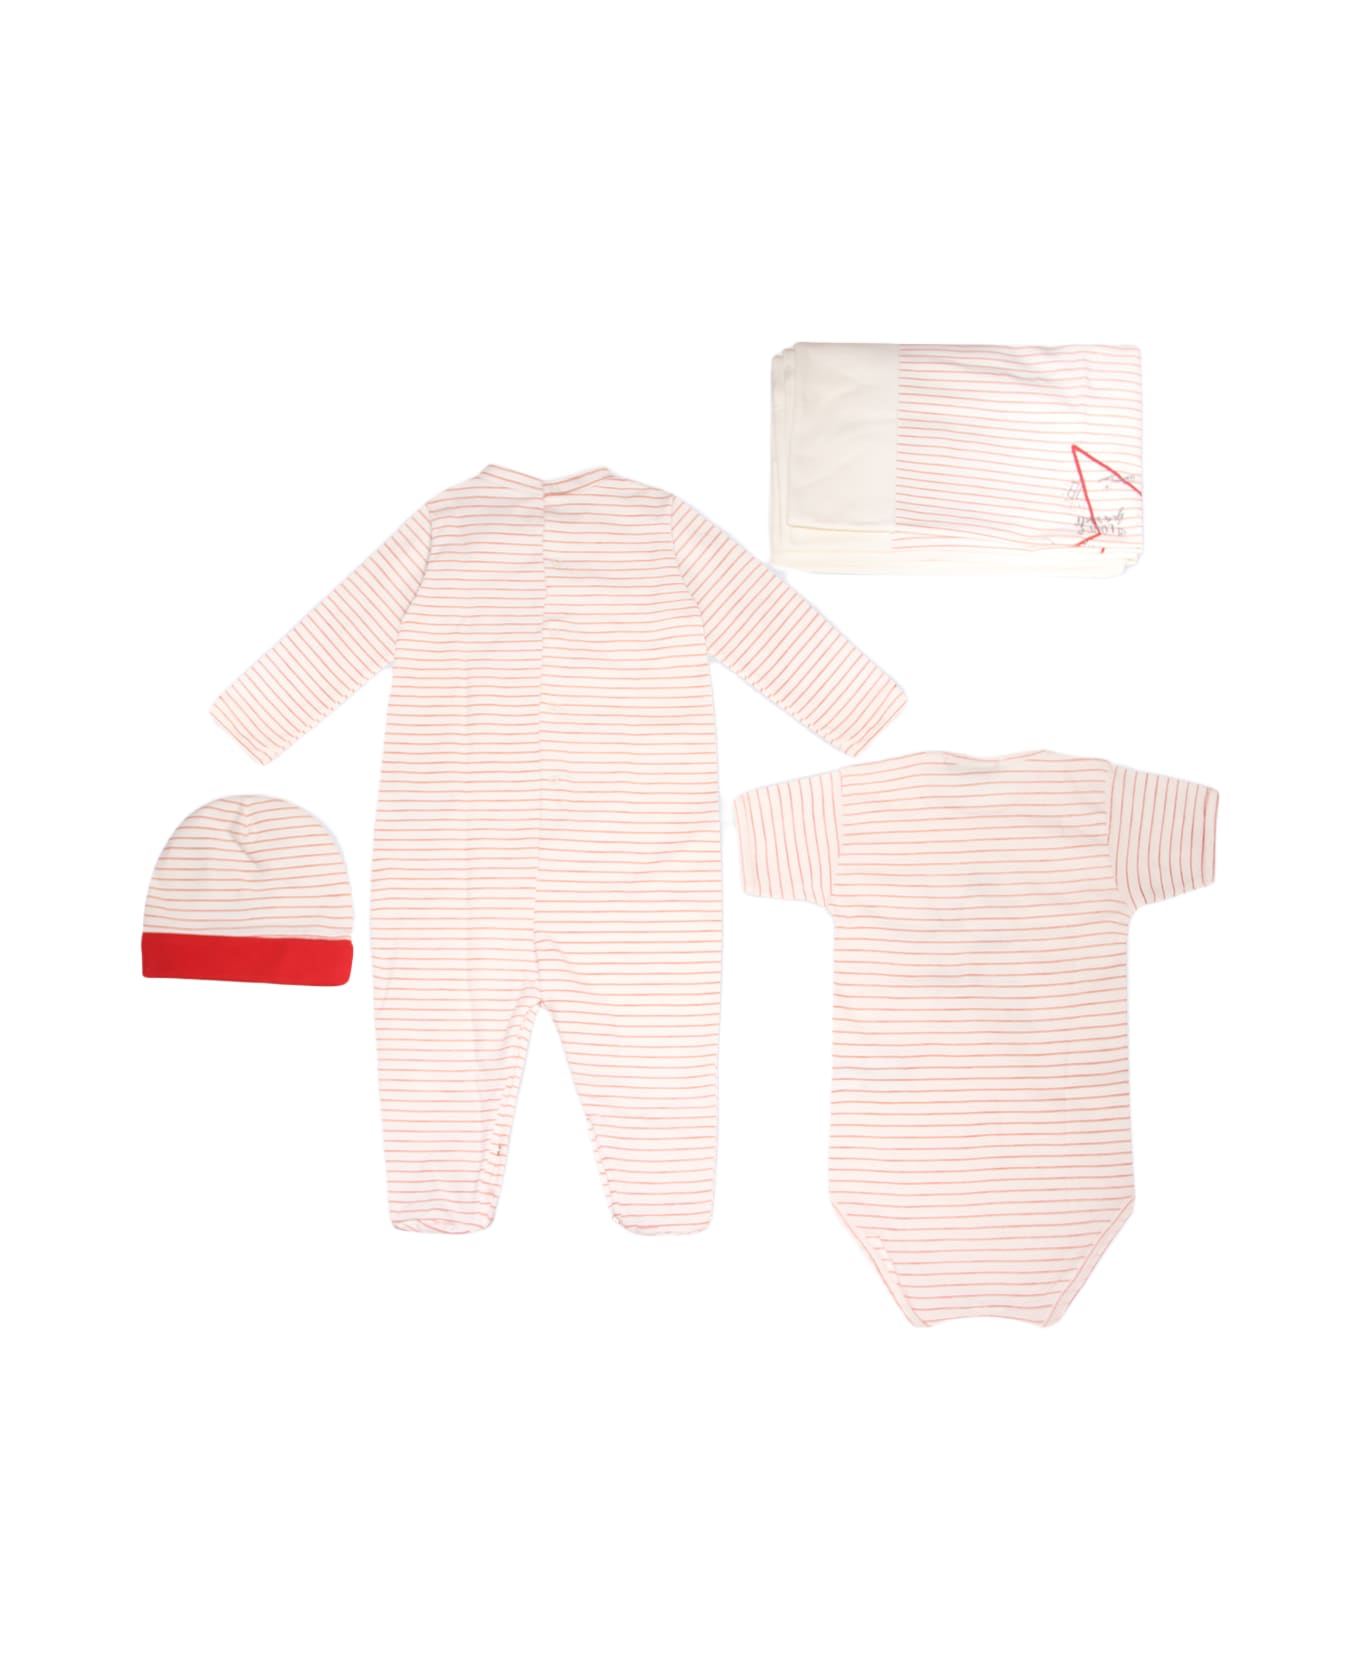 Golden Goose Red And White Cotton 4 Pieces Nursery Set アクセサリー＆ギフト